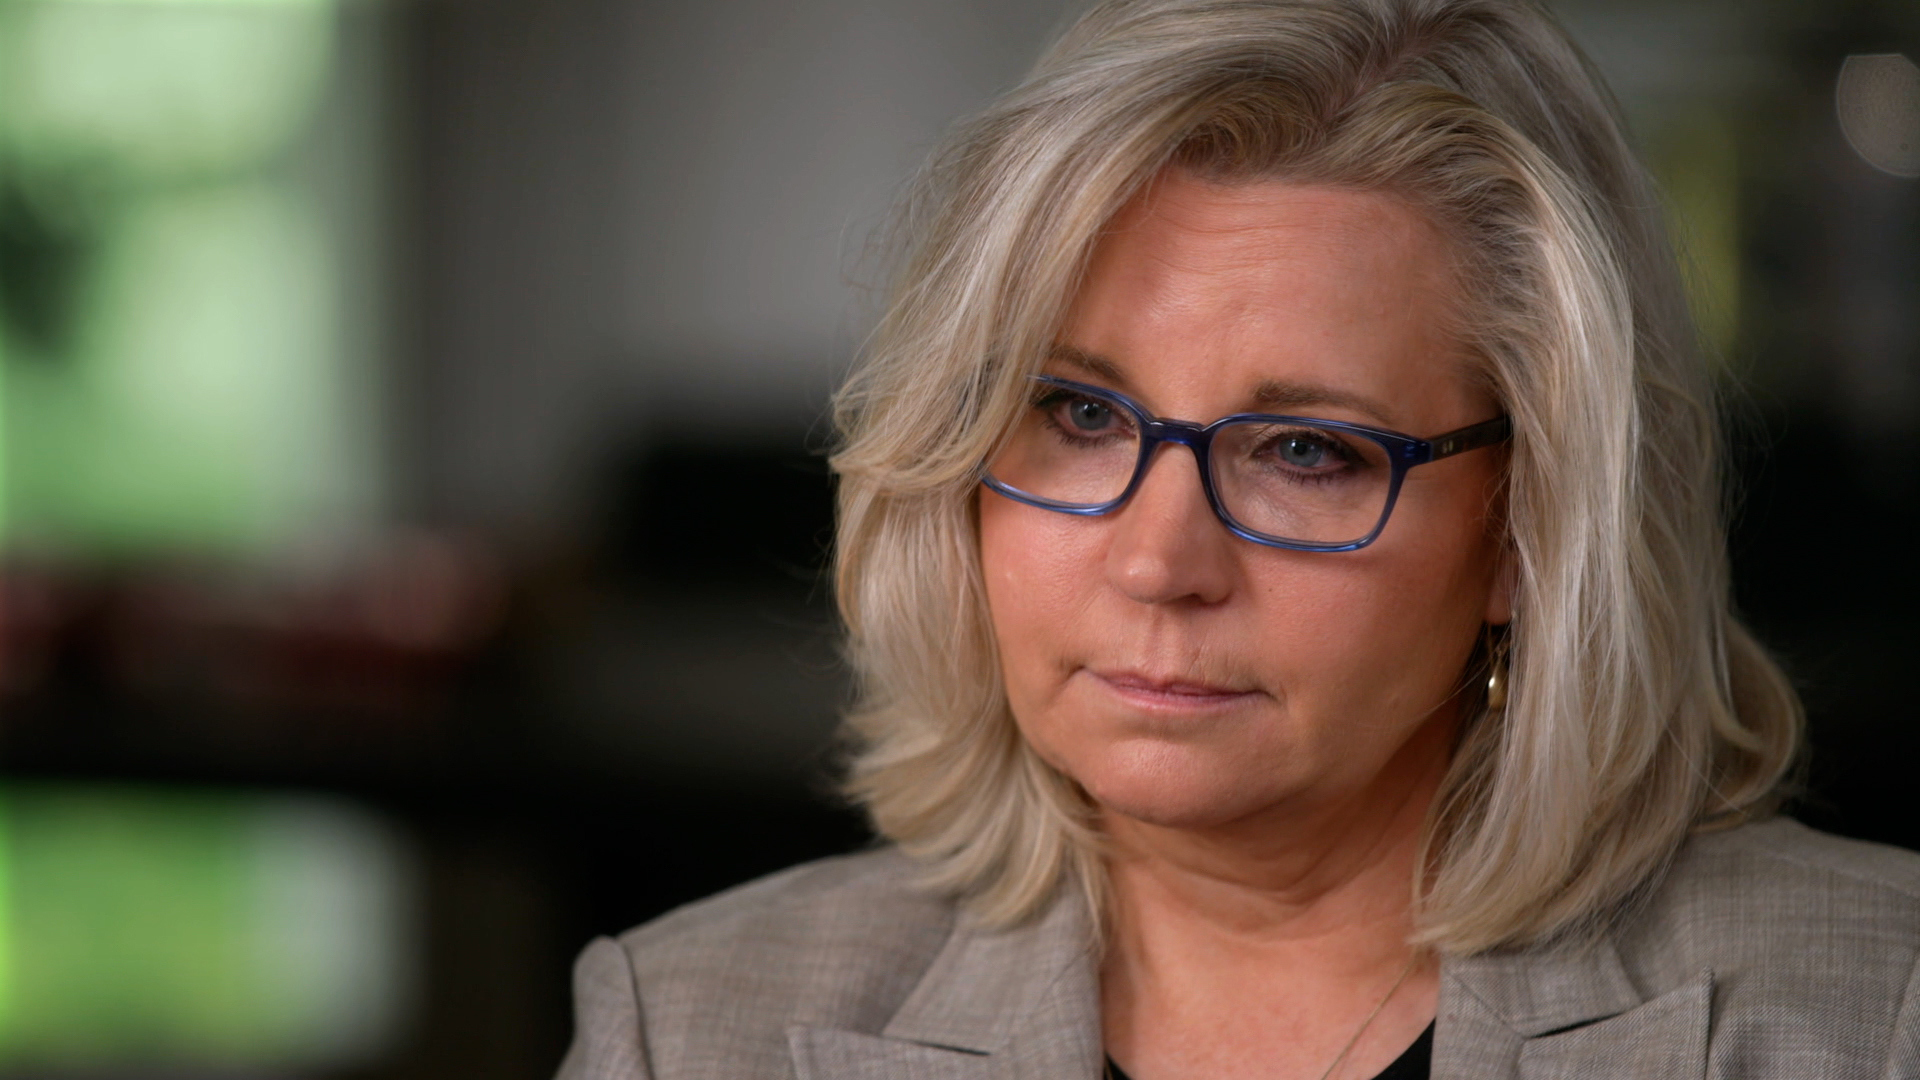 Watch 60 Minutes Liz Cheney The 60 Minutes Interview Full show on CBS